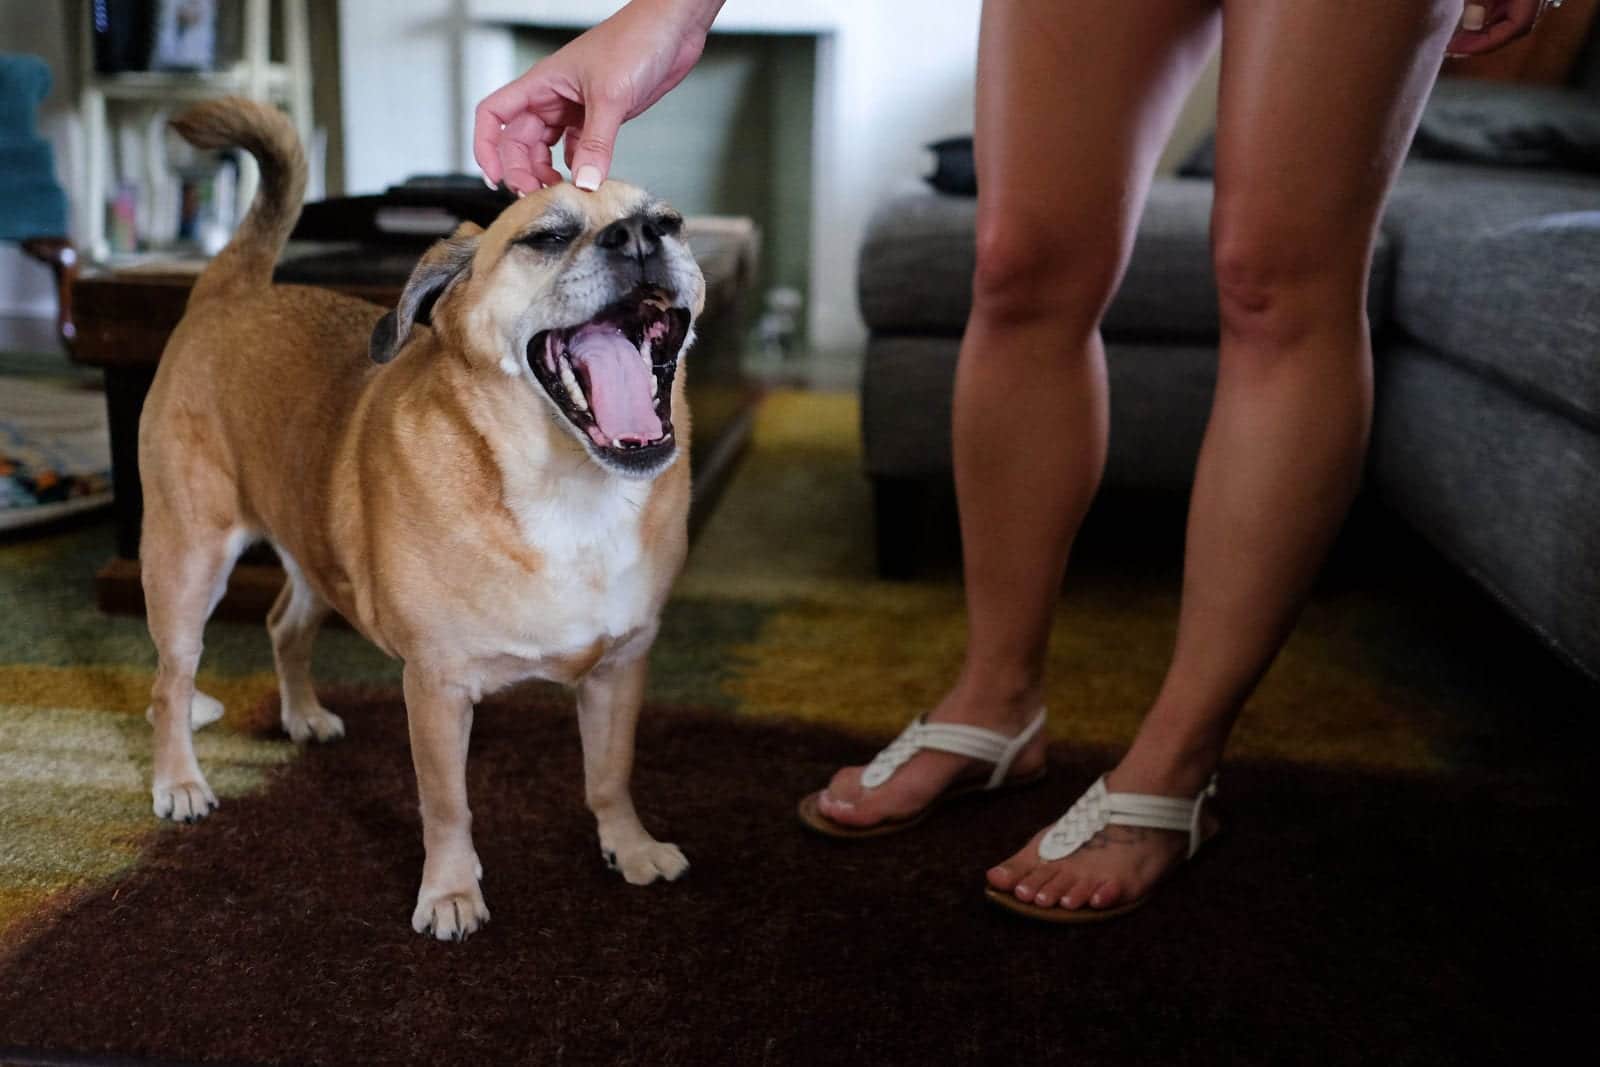 A puggle yawns as his owner scratches the top of his head.